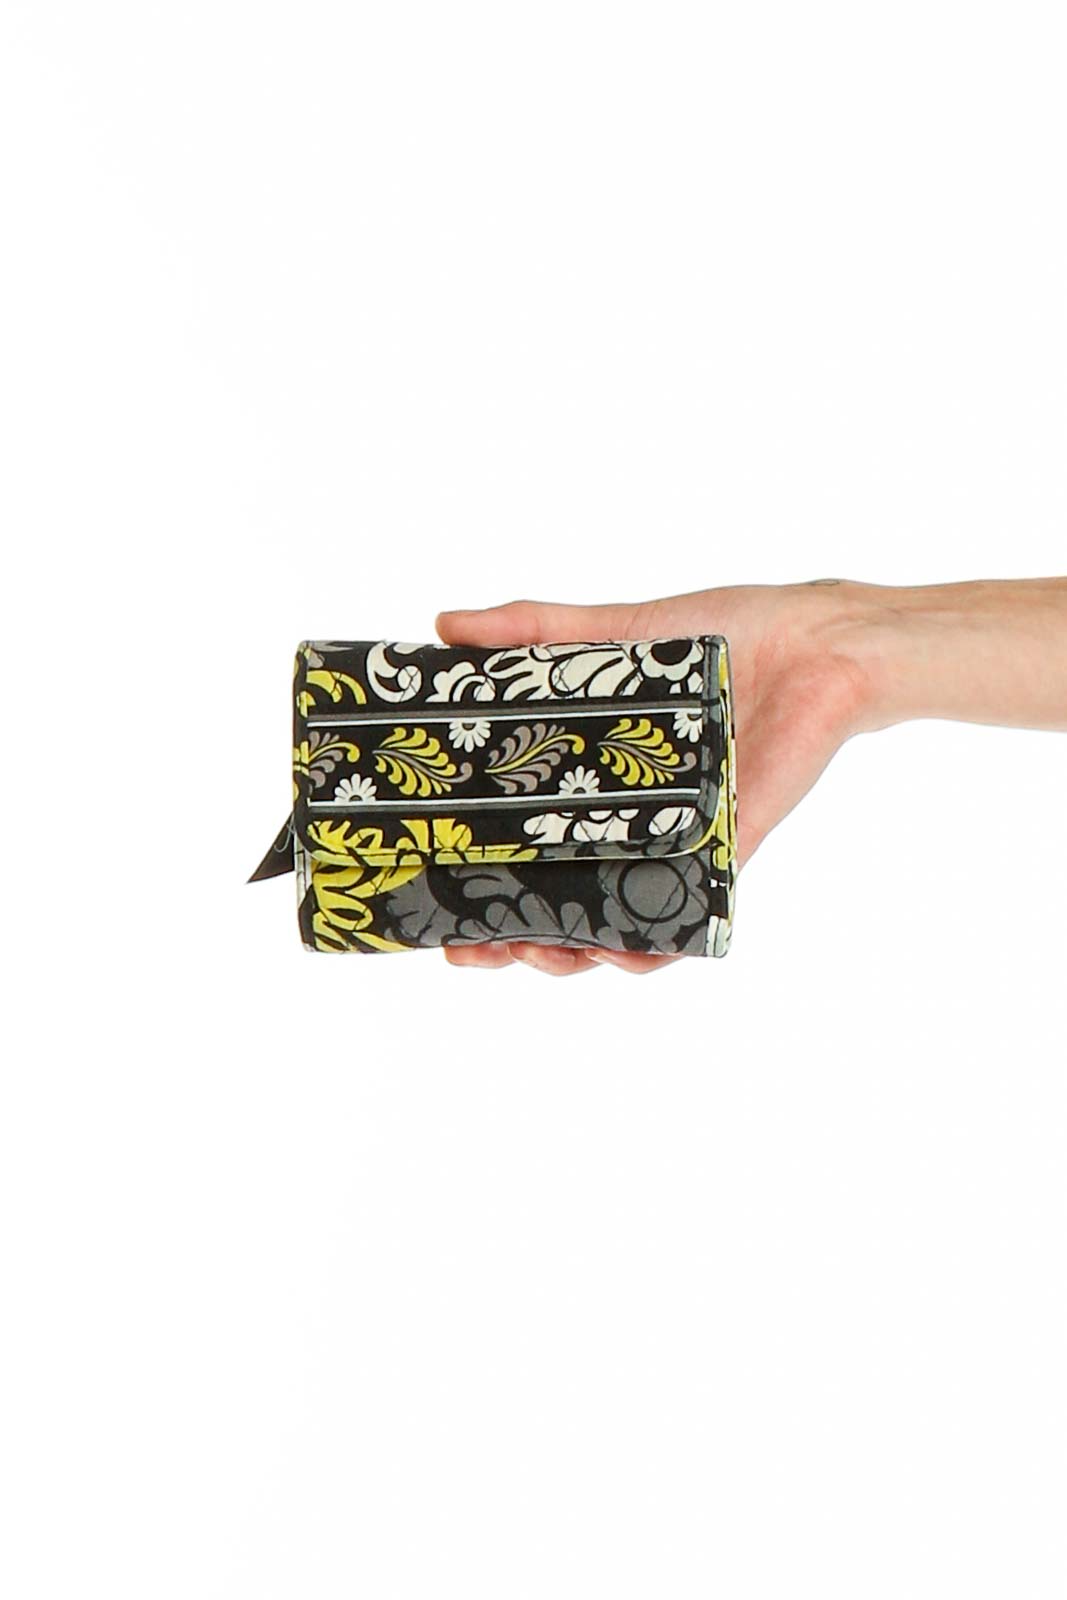 Black Gray Green Printed Clutch Front